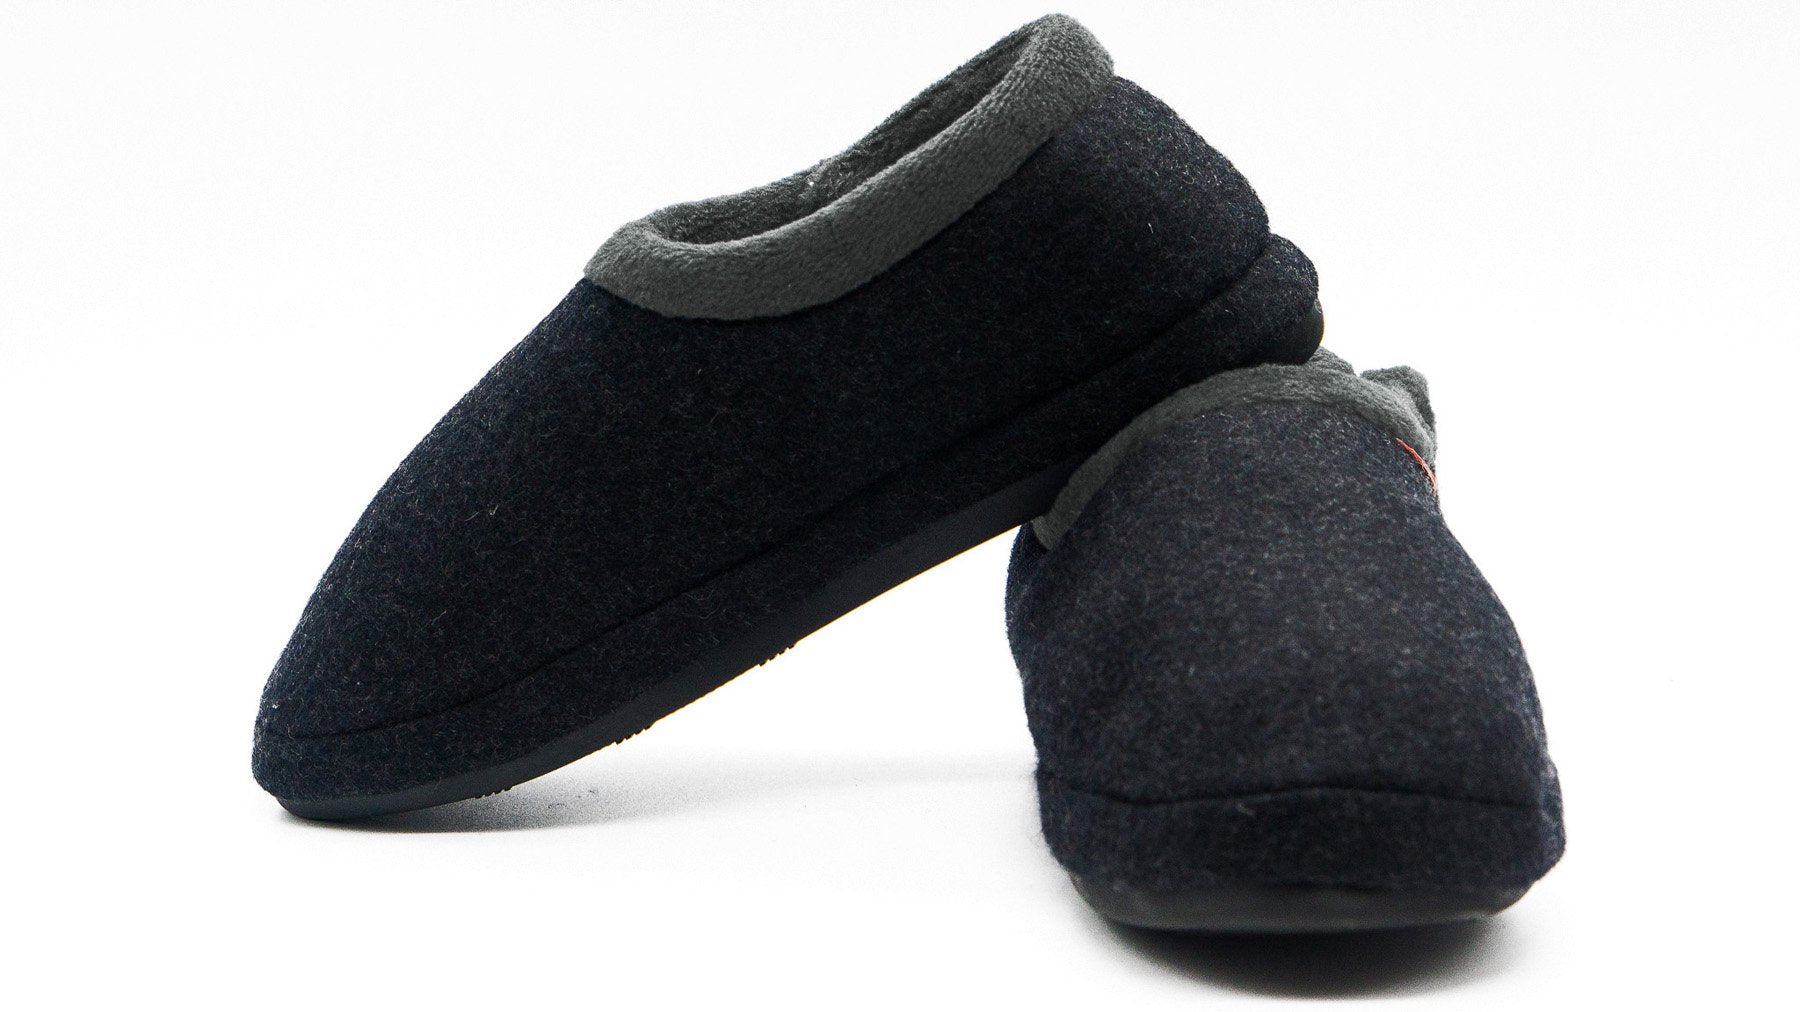 Archline Orthotic Slippers Closed – Charcoal Marl – Axign Medical Footwear